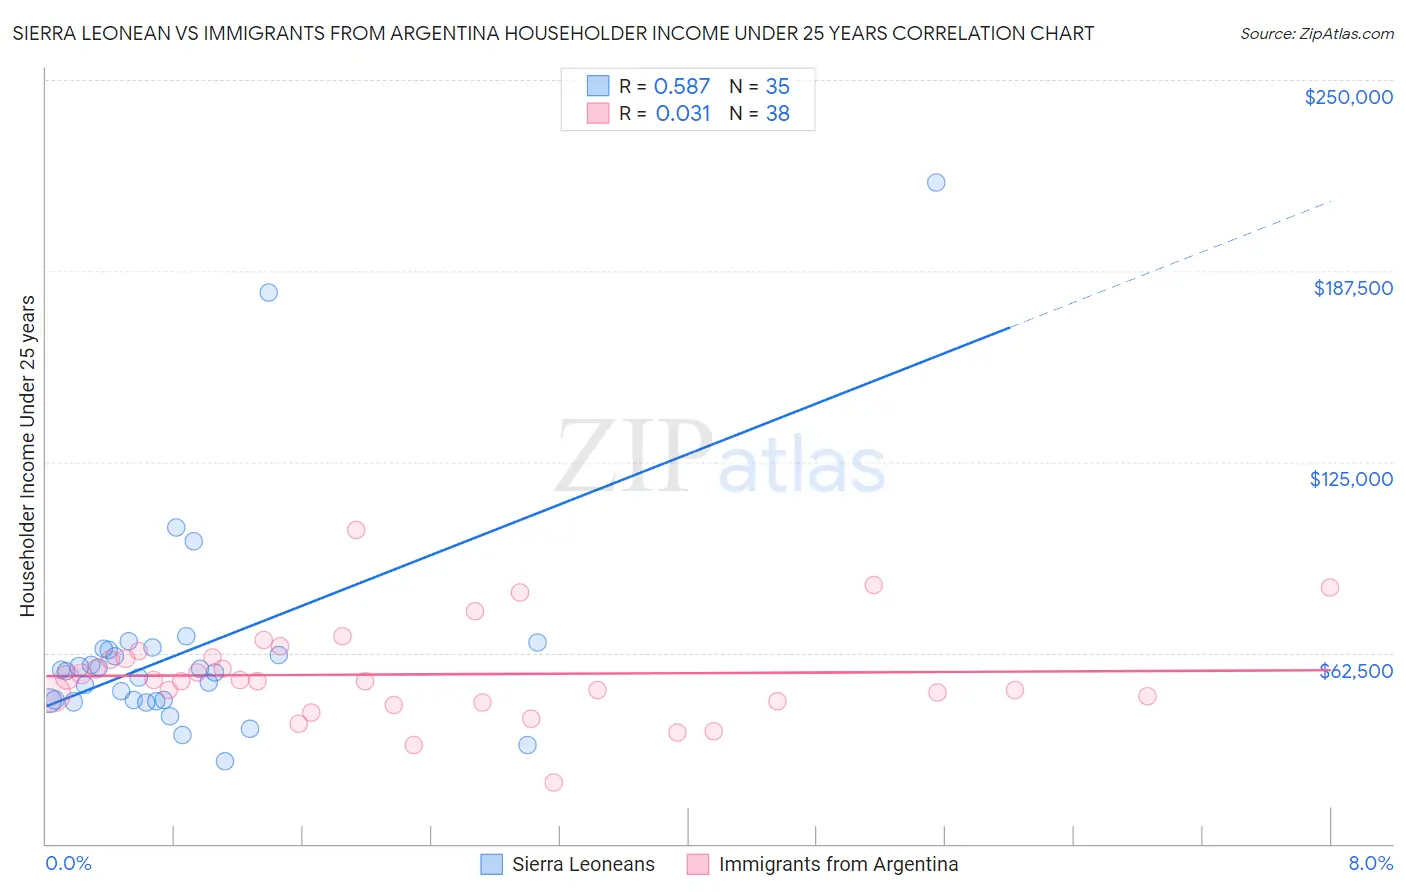 Sierra Leonean vs Immigrants from Argentina Householder Income Under 25 years